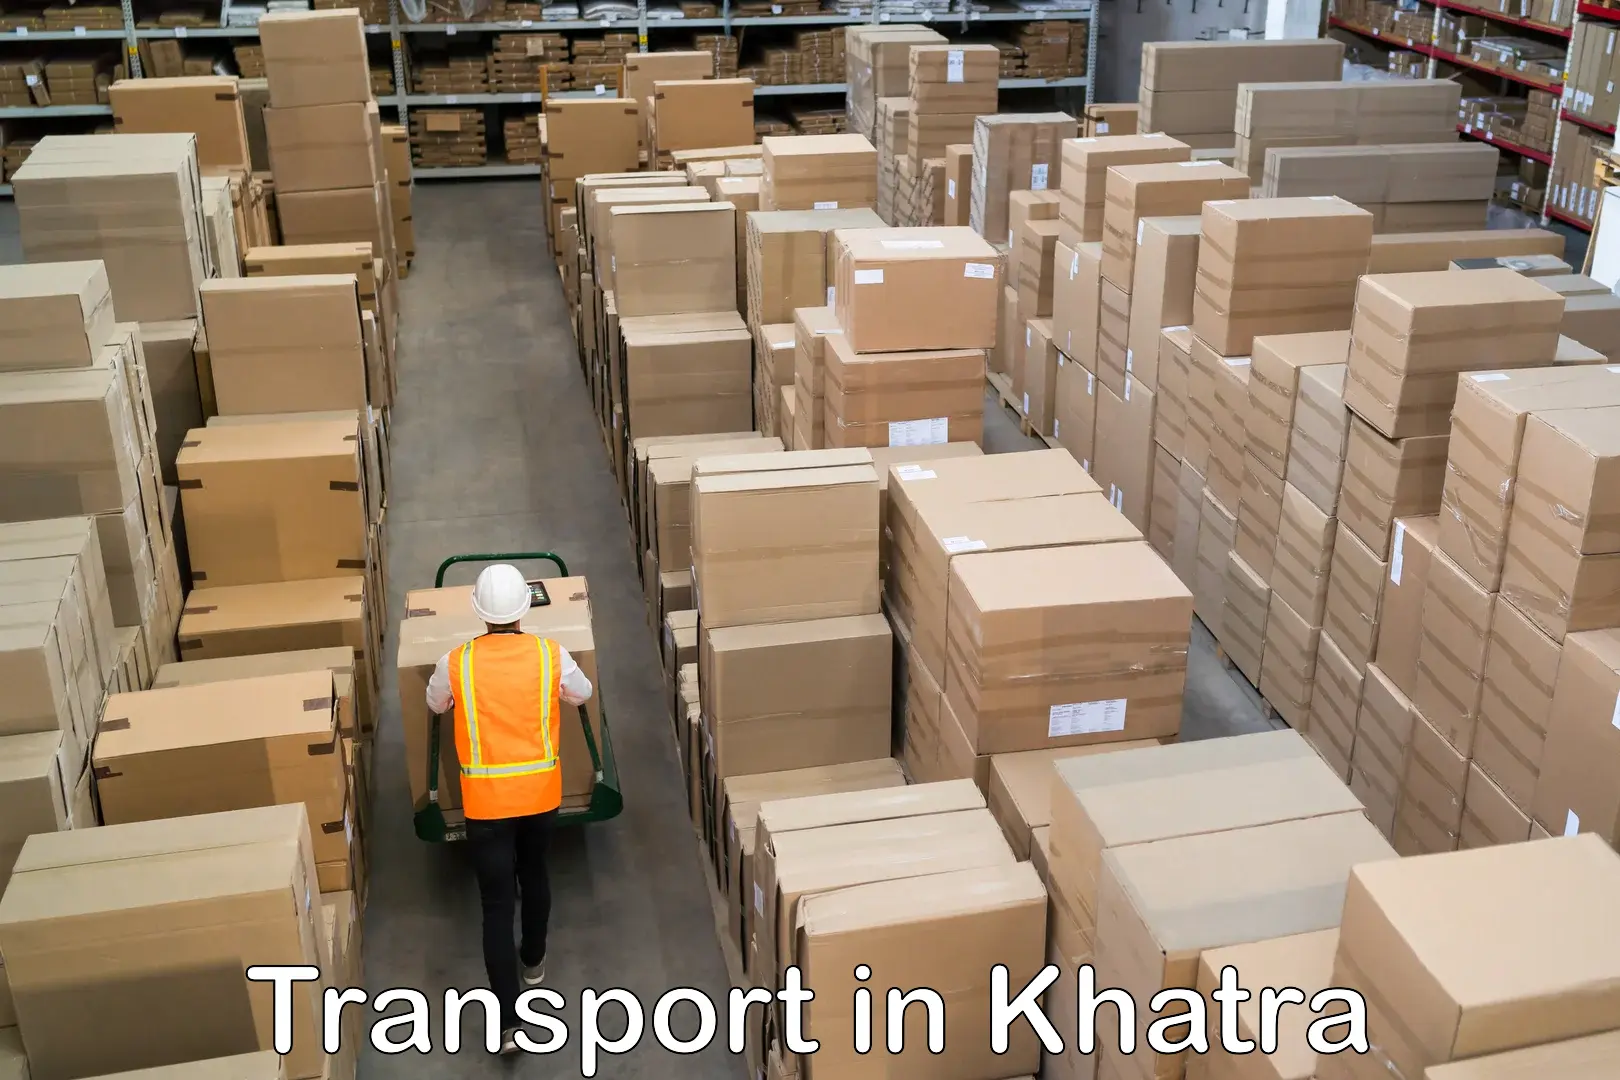 Container transportation services in Khatra